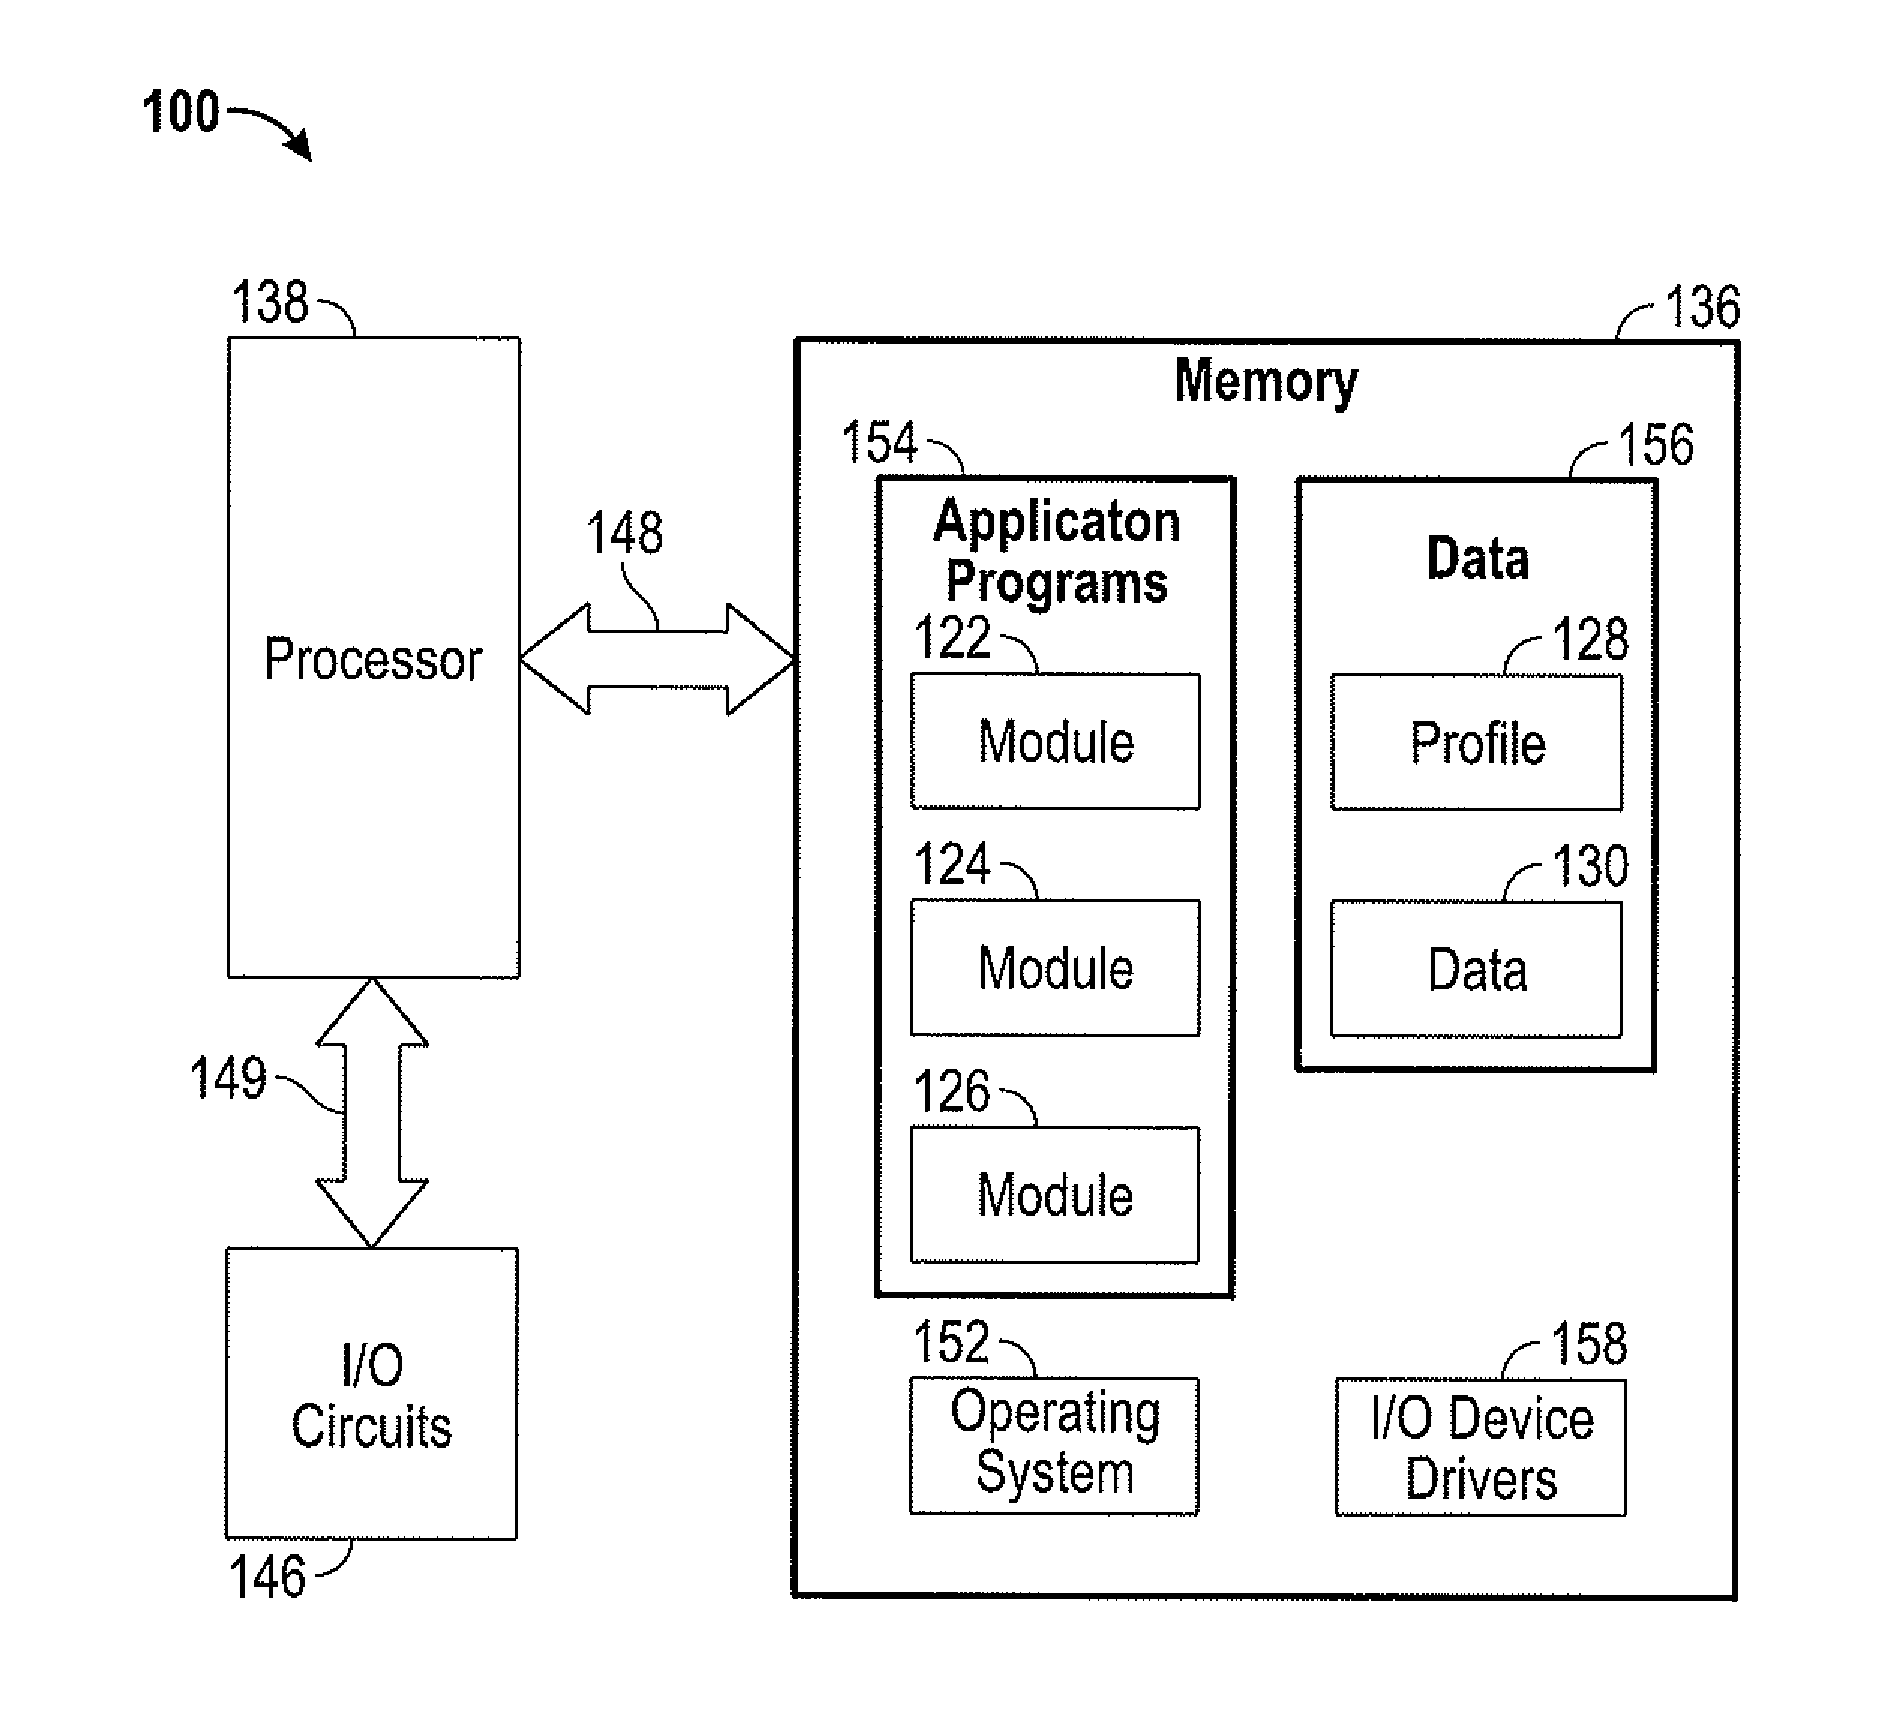 Methods and systems for electronically marketing a product through affiliate sponsorships via a computer network